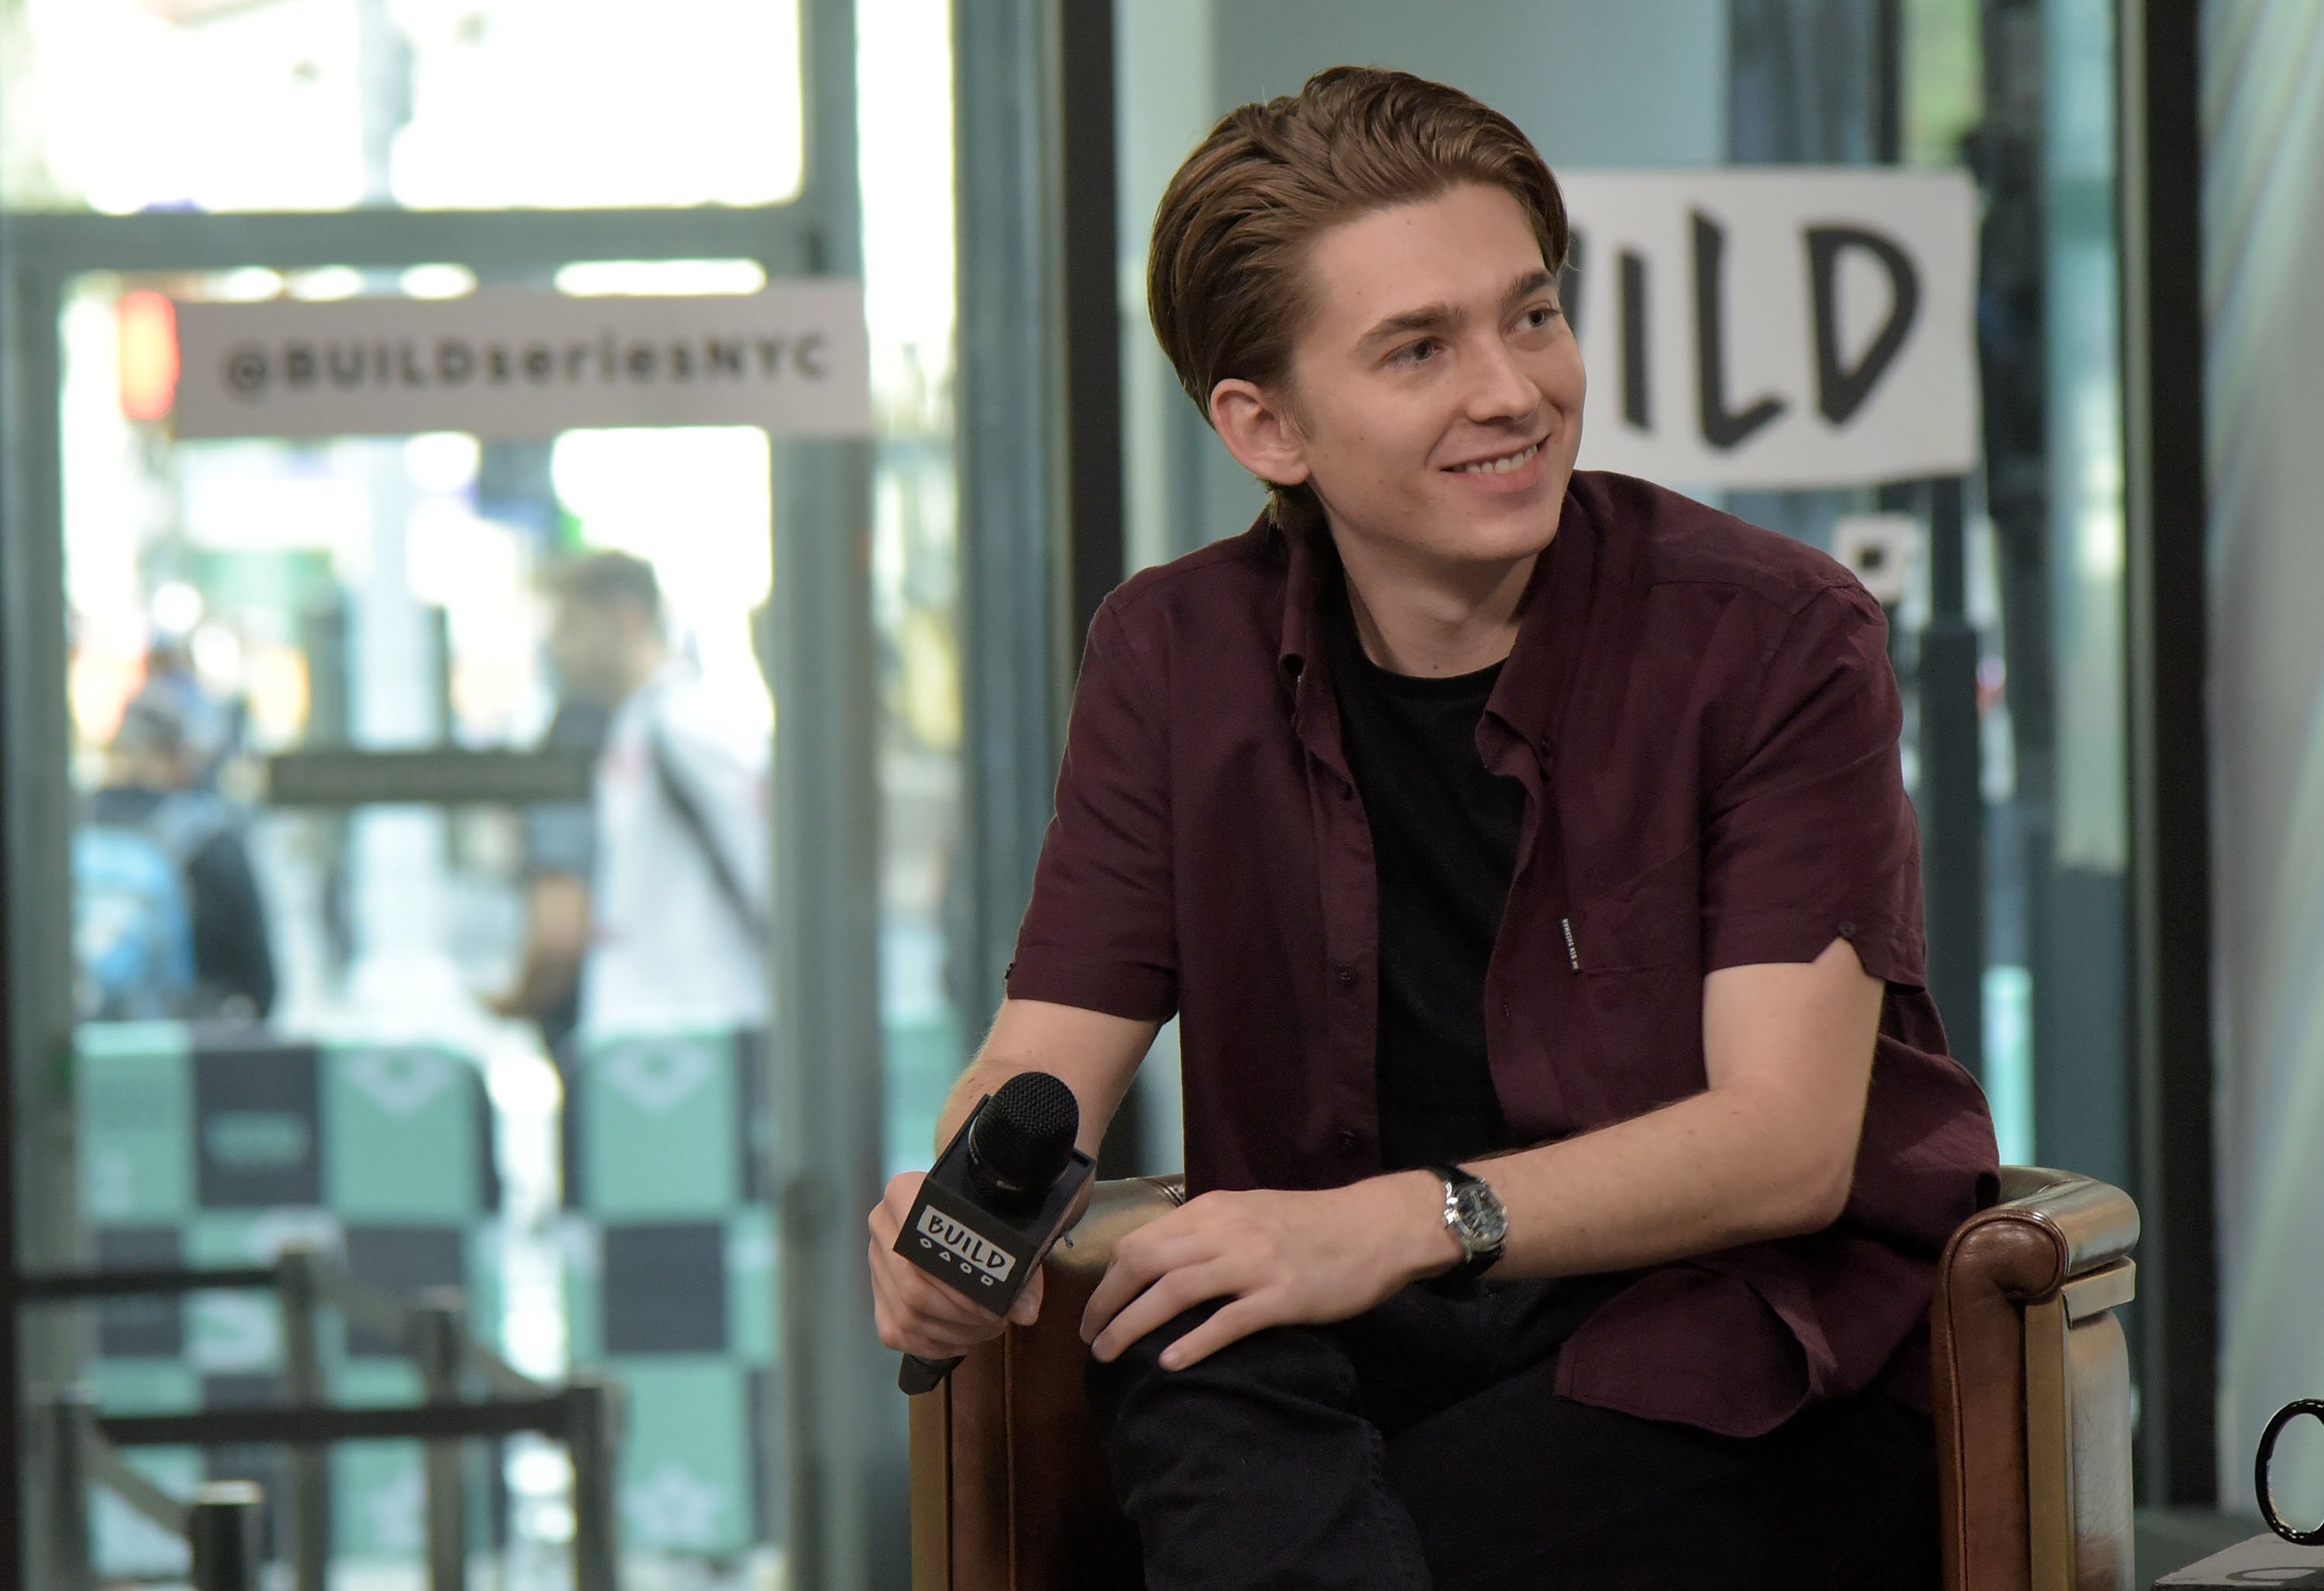 Austin Abrams at Build series to discuss "Brad's Status" at Build Studio on September 11, 2017 in New York City. | Source: Getty Images